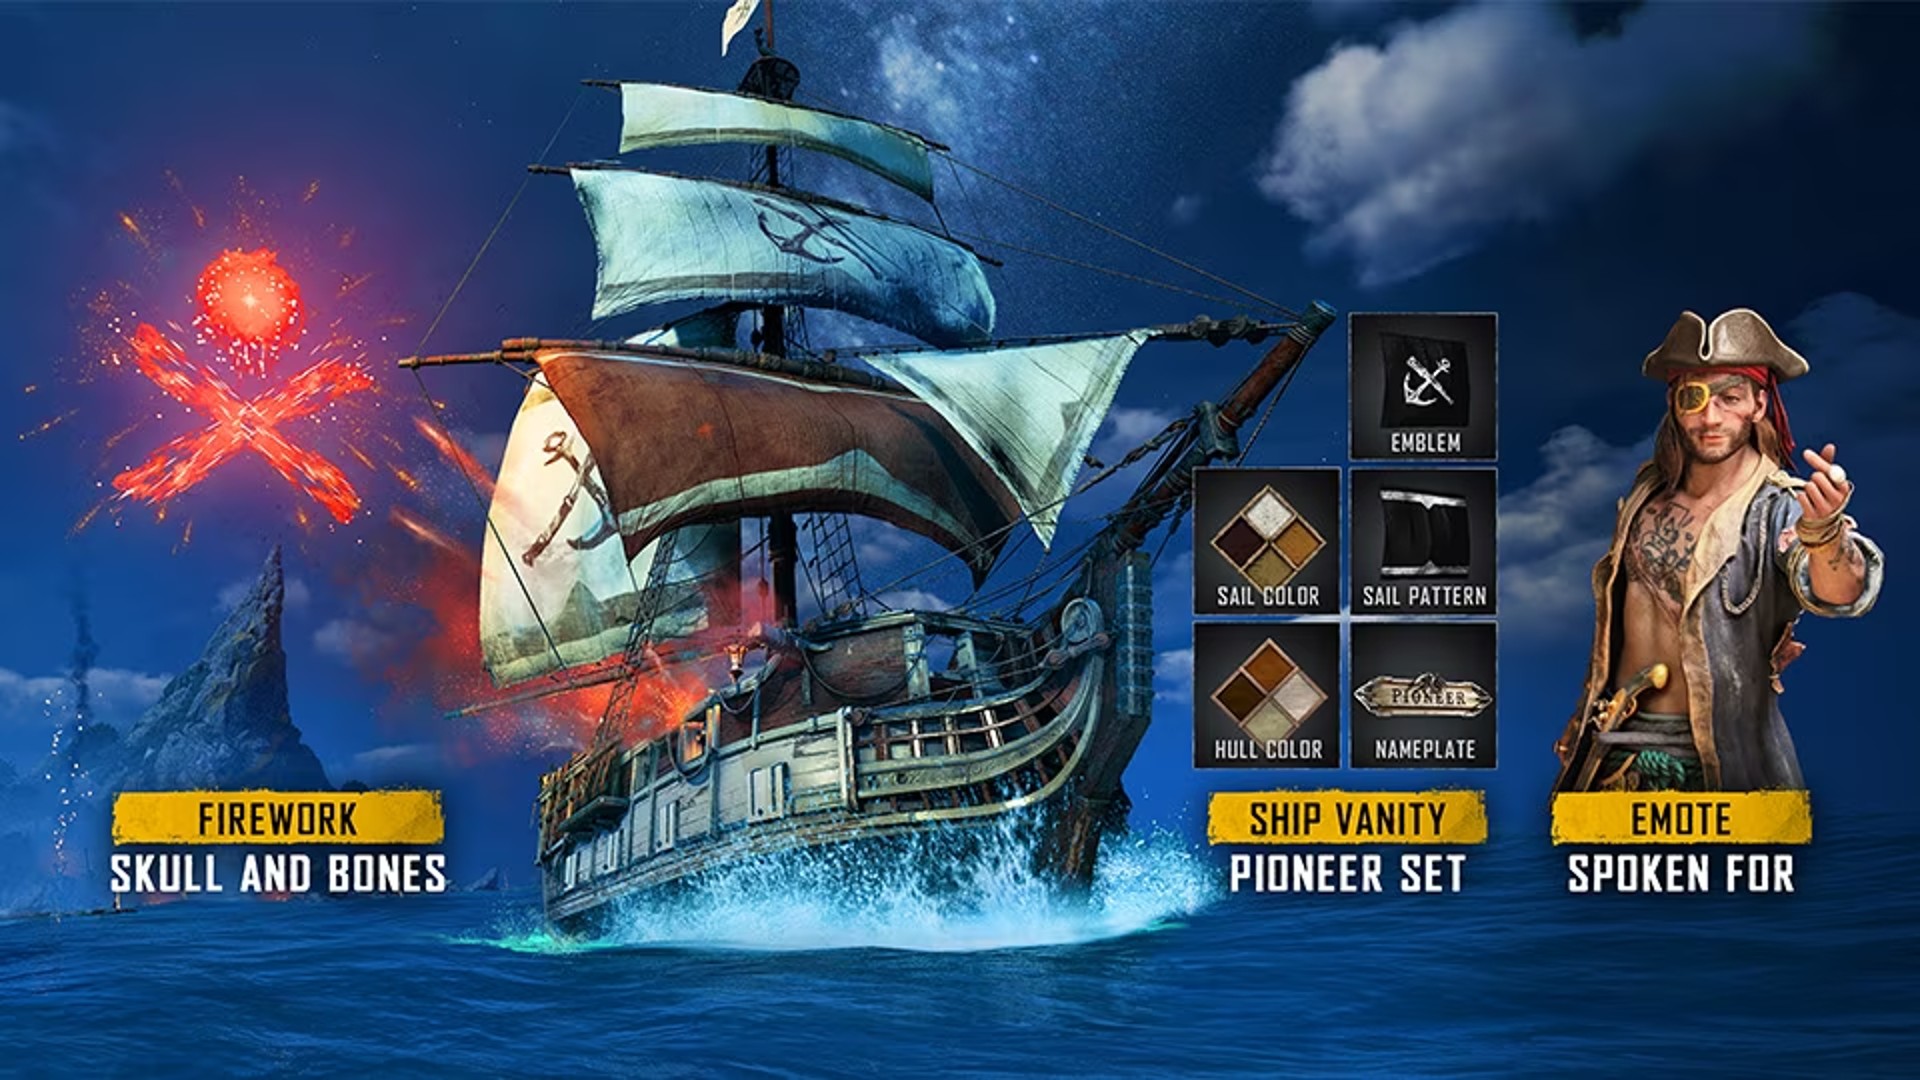 This Has To Be The Next Best Pirate Game! - Skull And Bones 